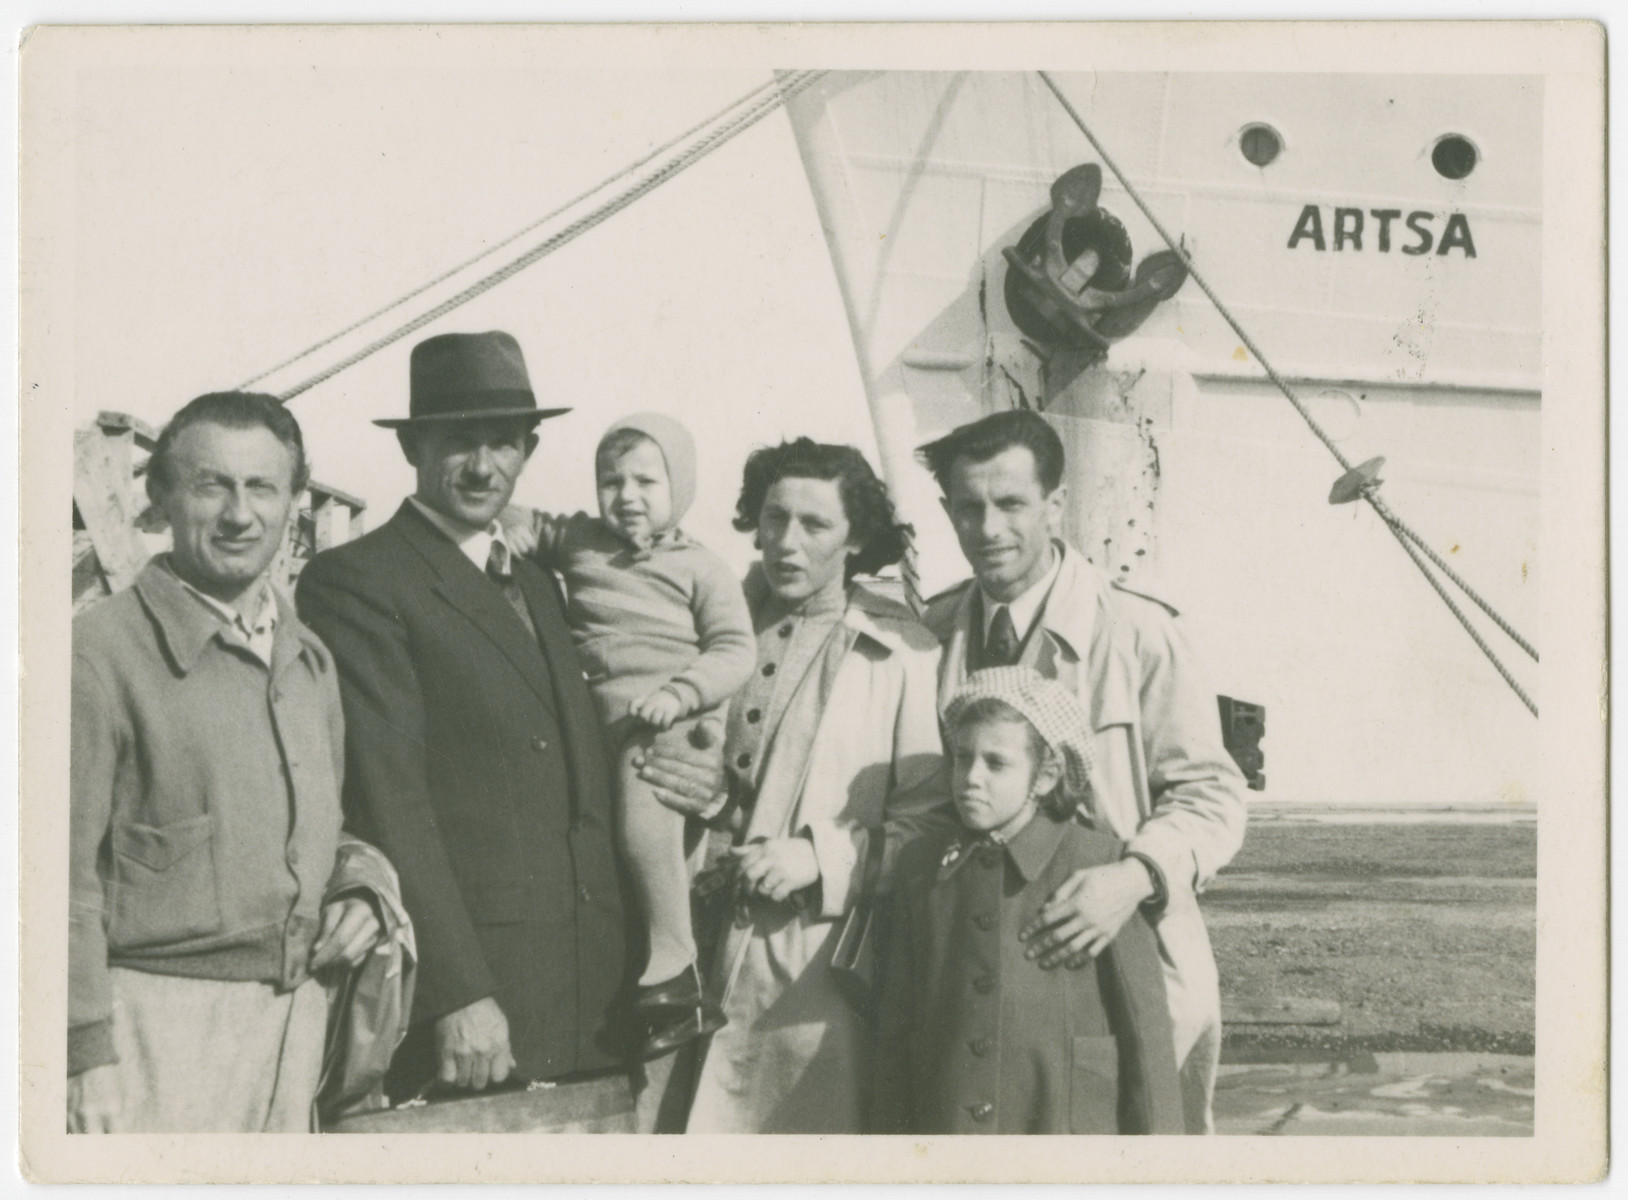 The family of Yehuda Bielski prepares to sail from Israel to the United States.

From left to right are Marcus Hudes (unlce of Lola), Yehuda holding his son Yigal, Lola, and Eli Hudes (Lola's brother).  Nili Bielski is in front of him.